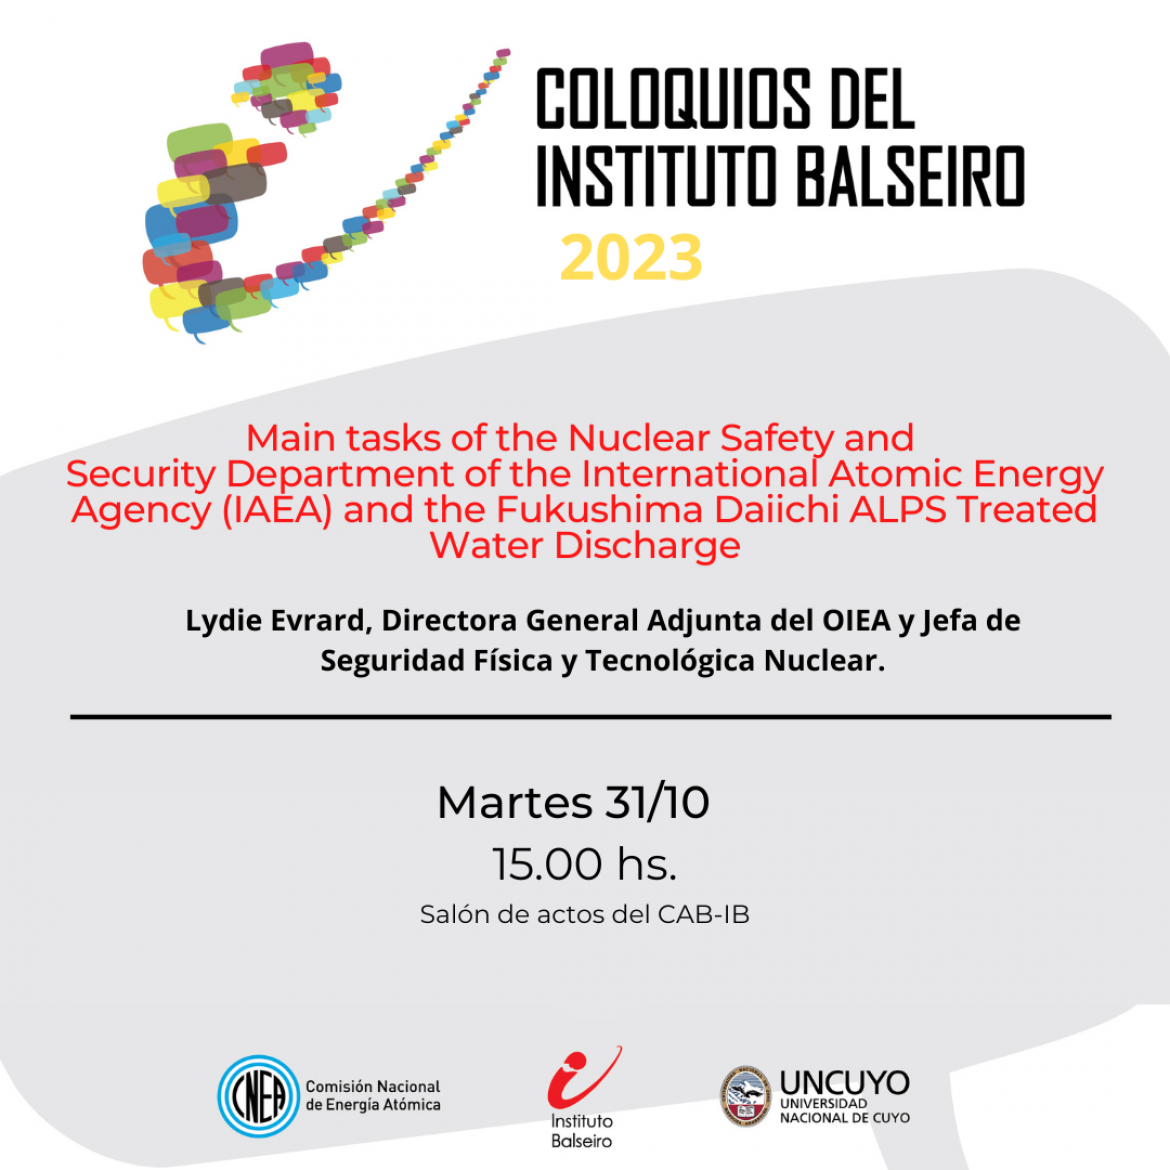 Coloquio del 31/10: Main tasks of the Nuclear Safety and Security Department of the International Atomic Energy Agency (IAEA) and the Fukushima Daiichi ALPS Treated Water Discharge